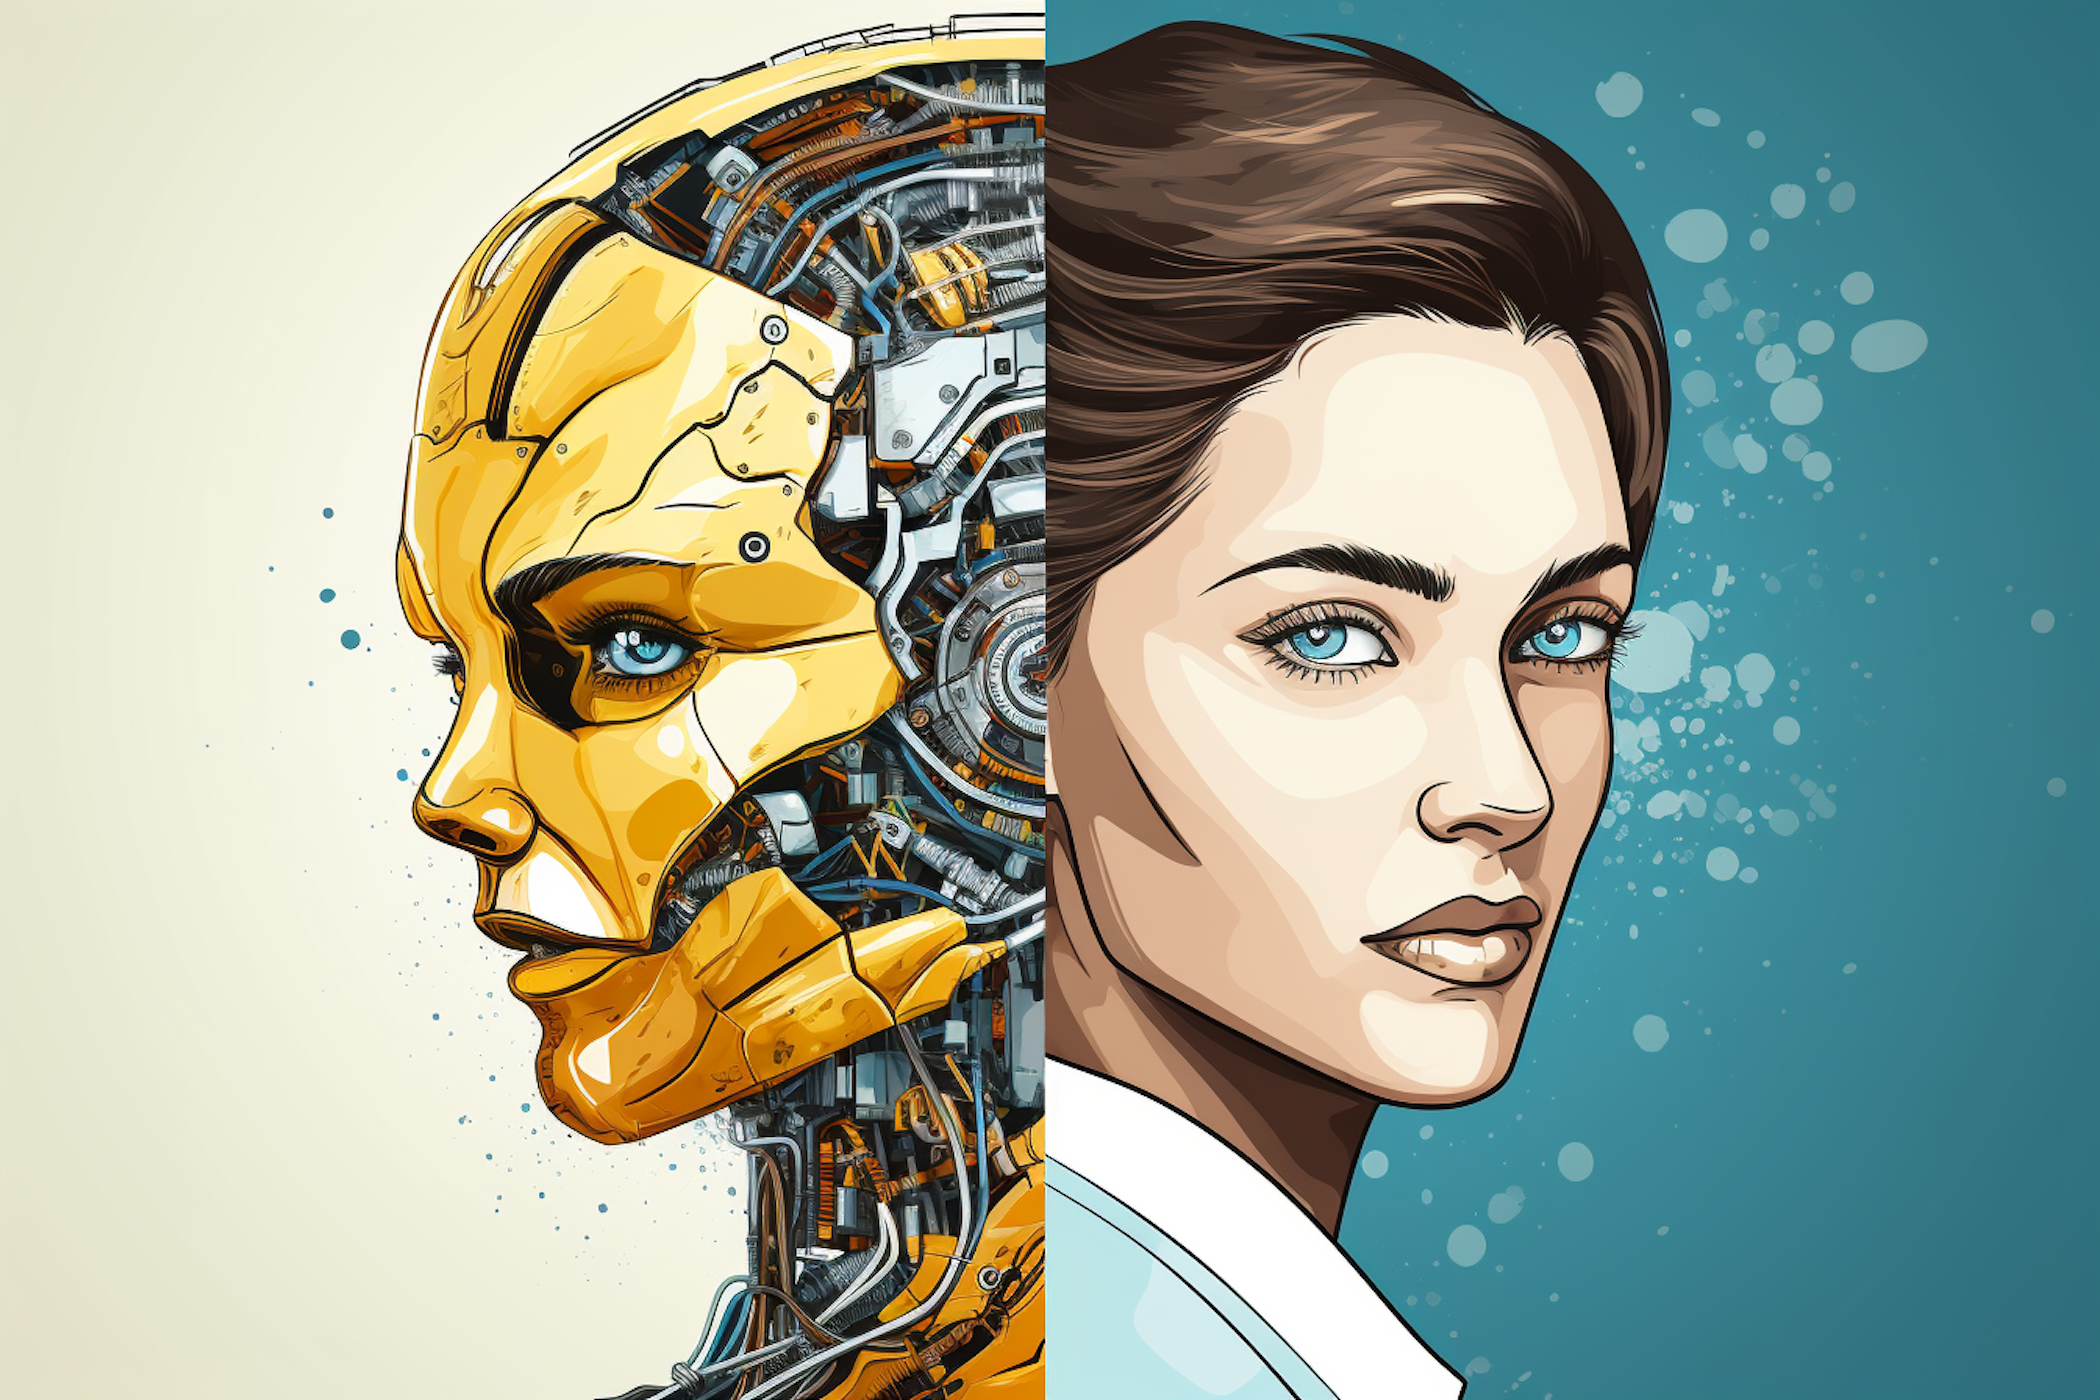 An image of a robot woman and human woman back to back